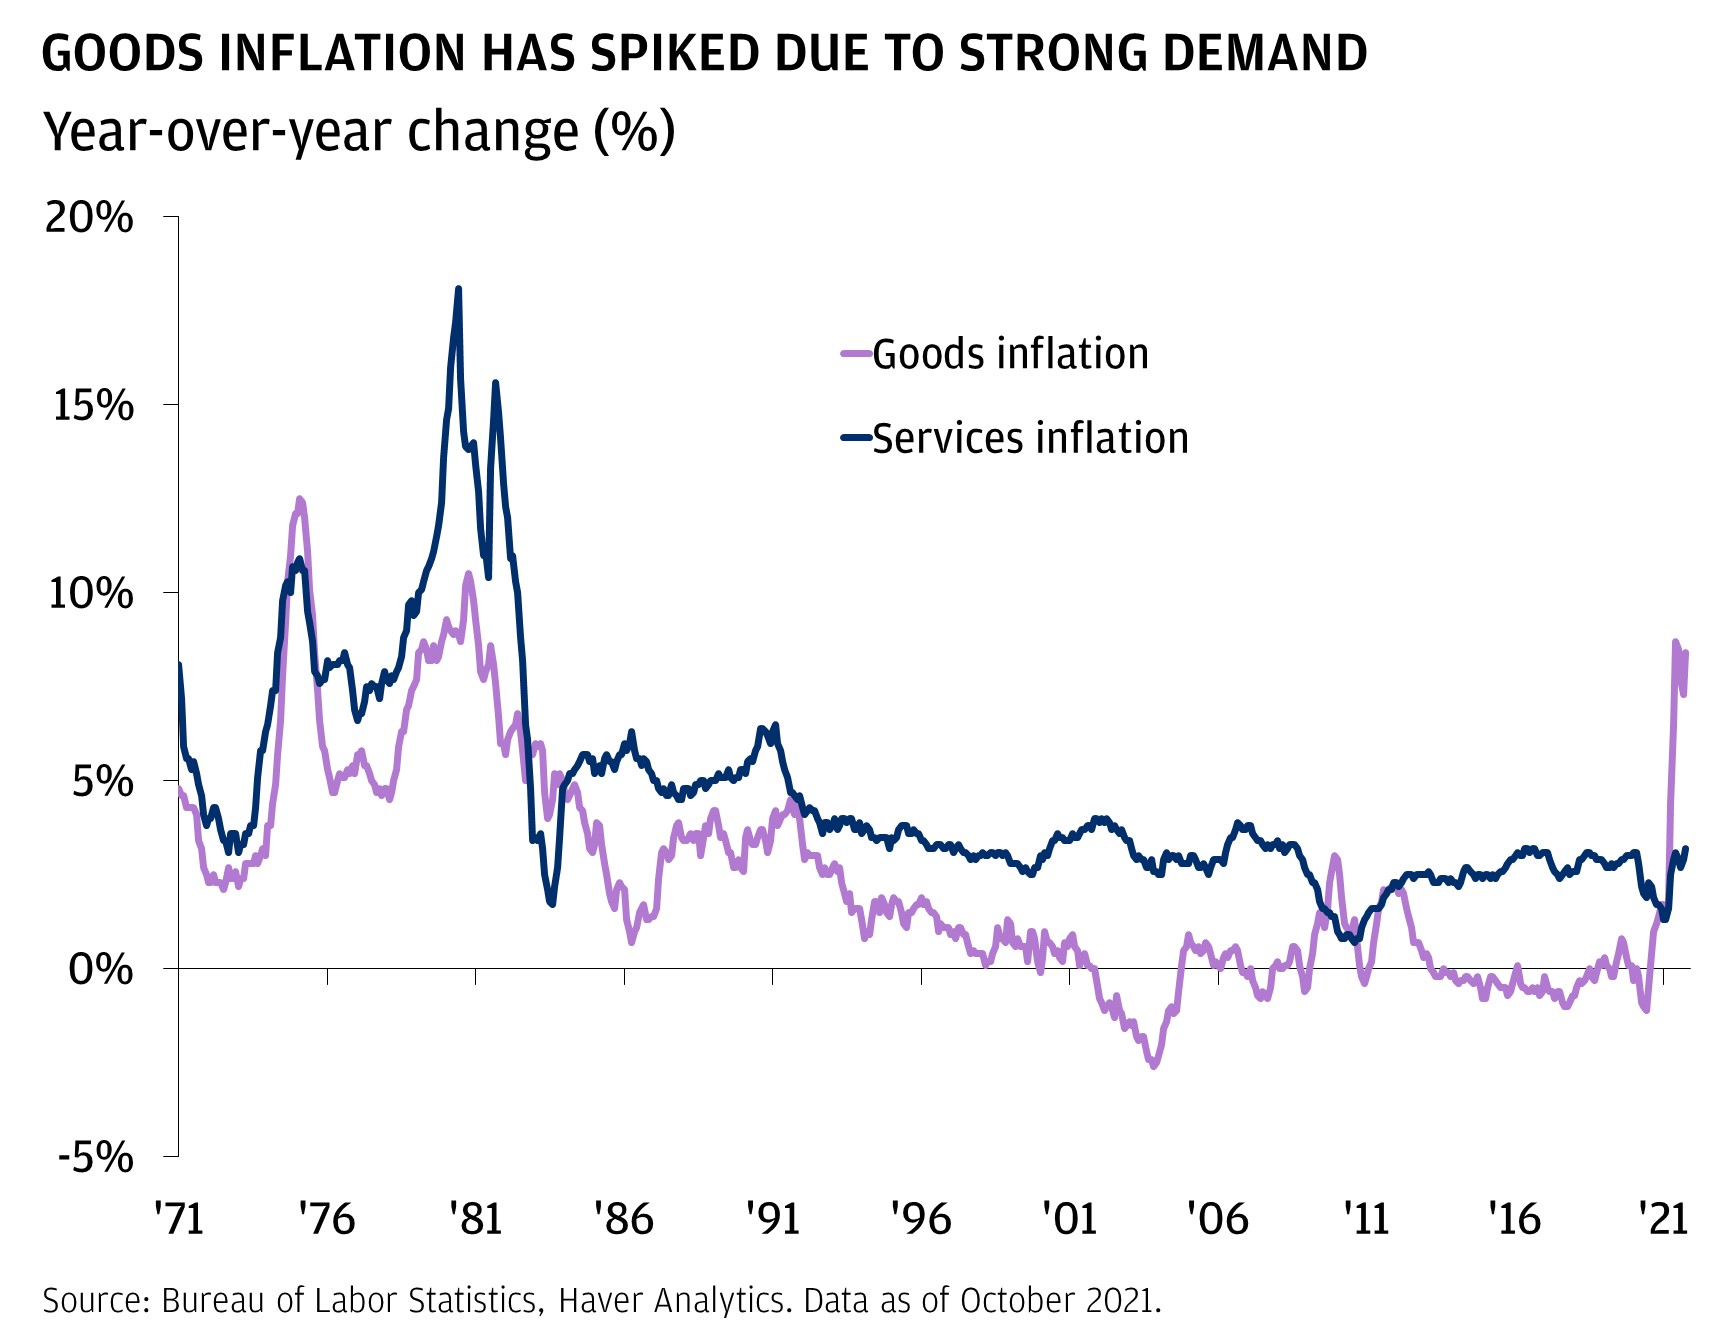 Goods inflation has spiked due to strong demand